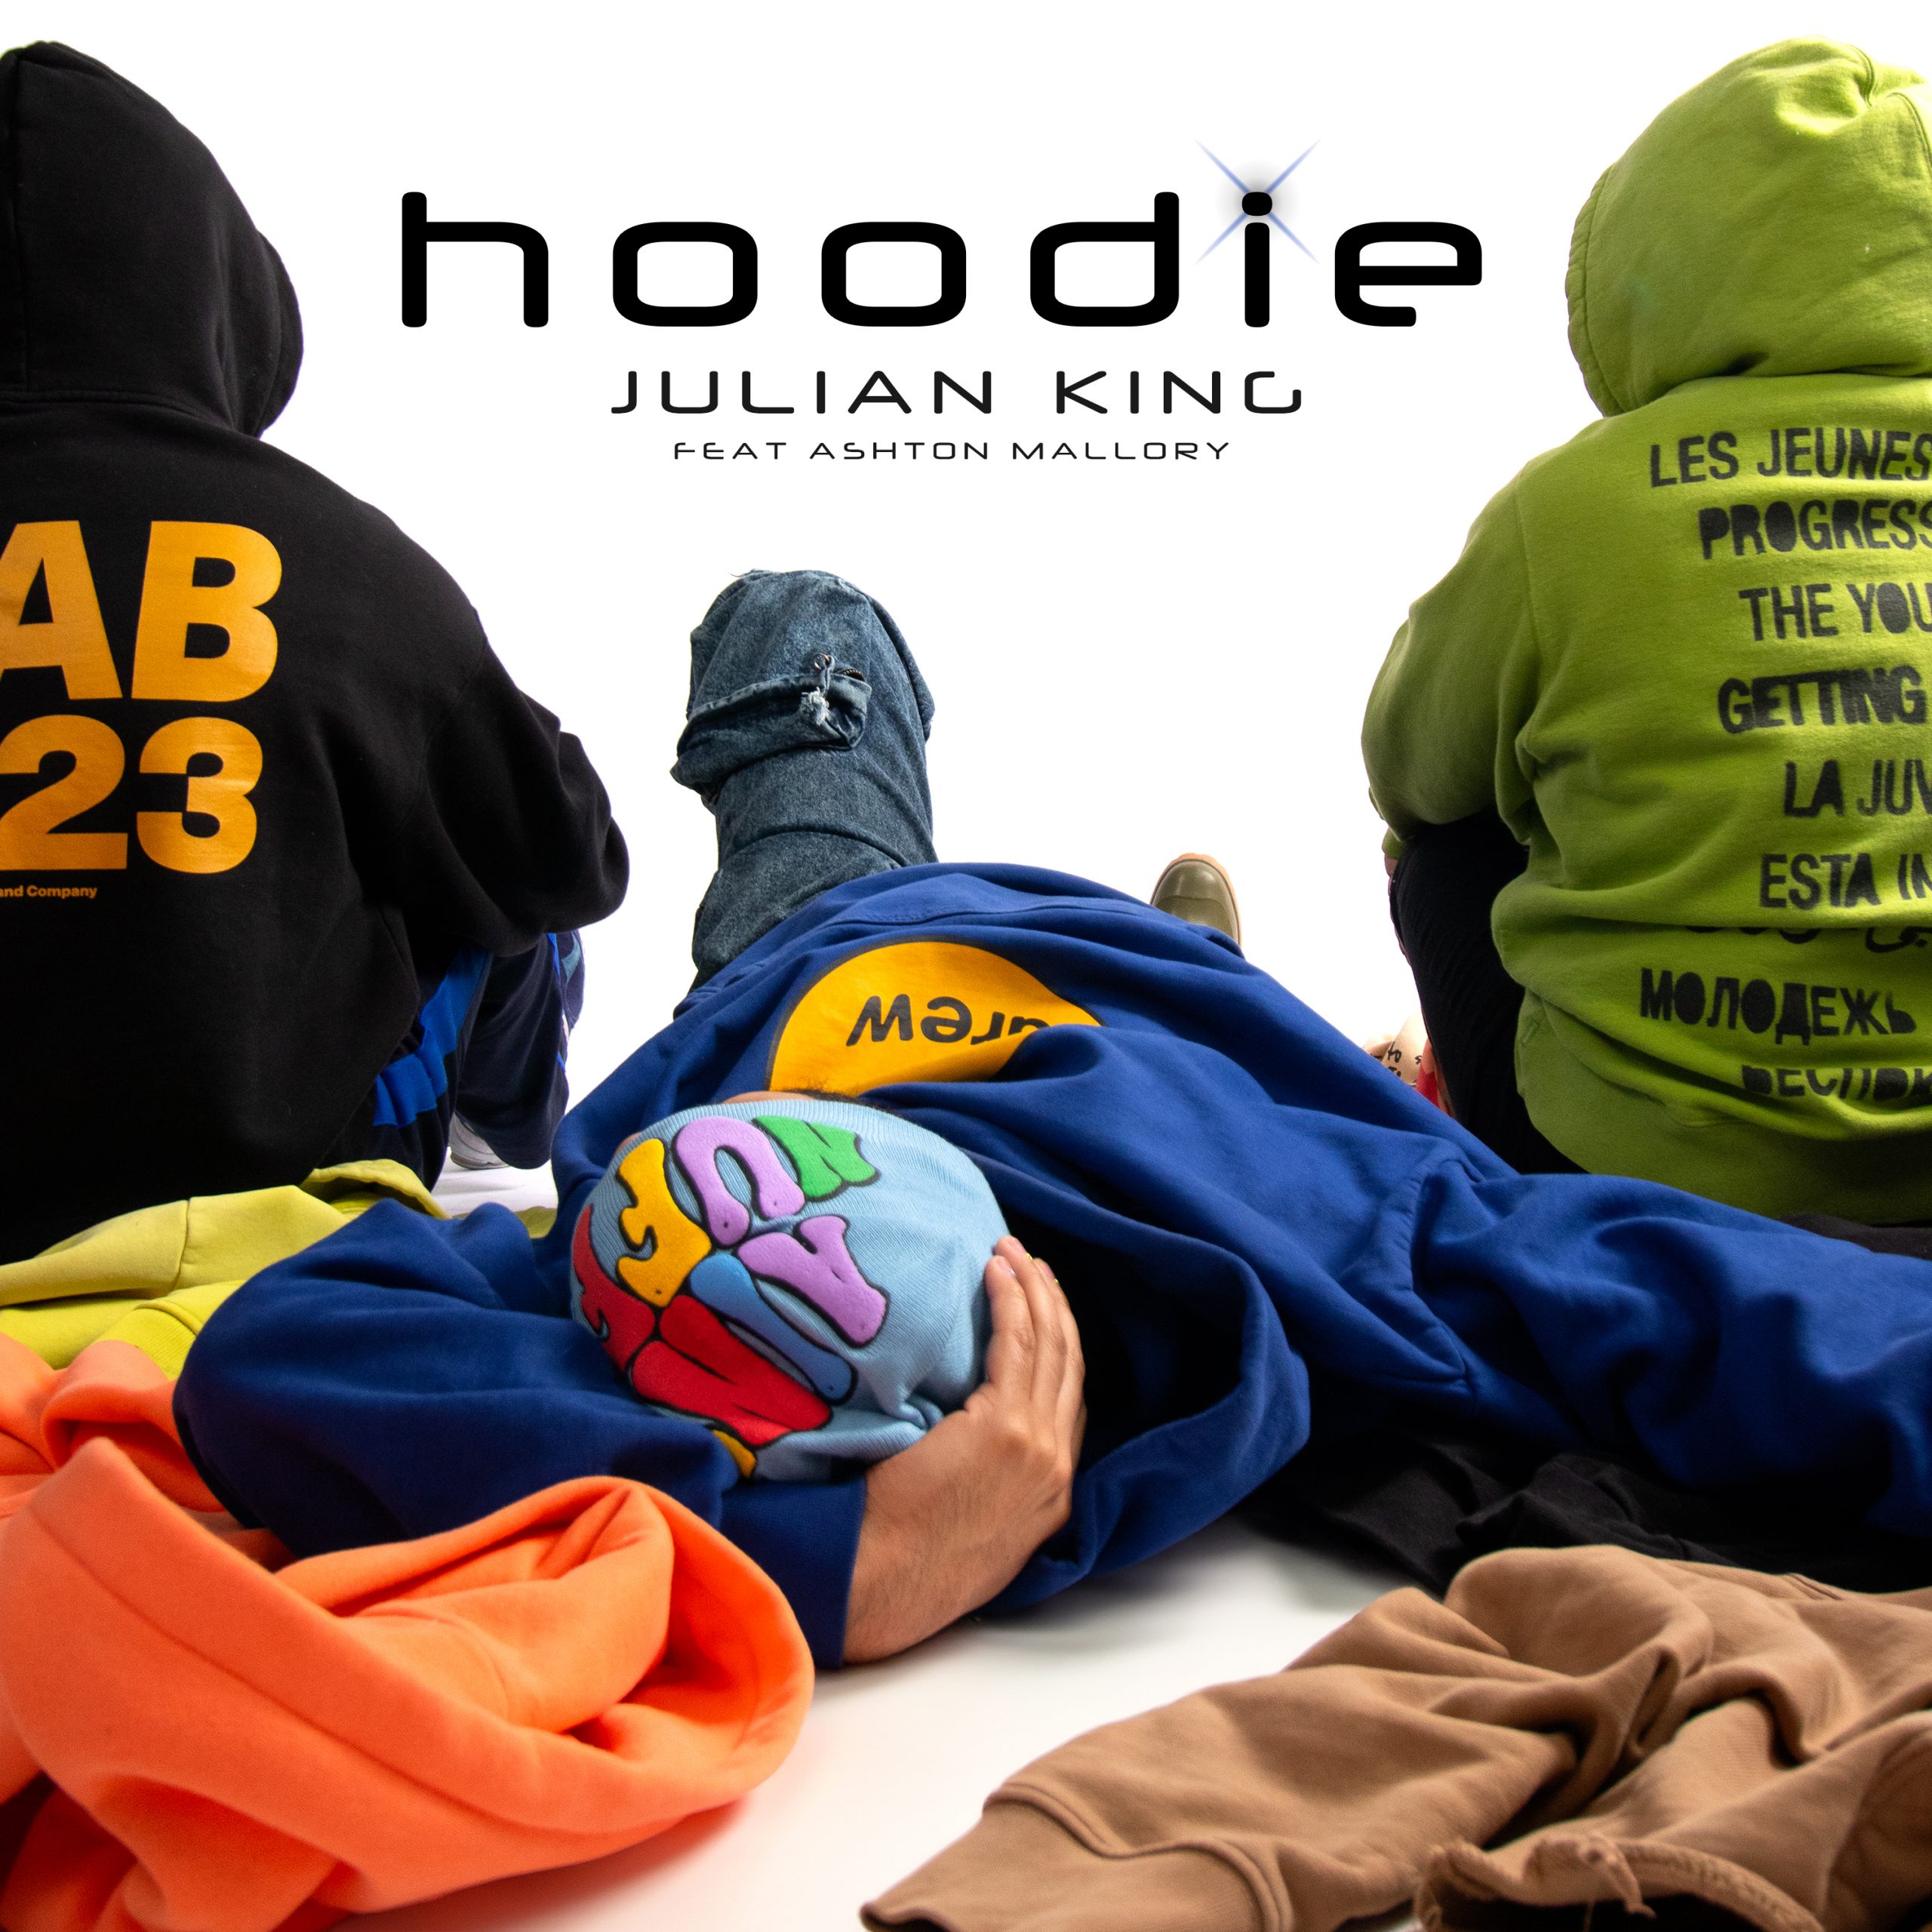 Julian King’s ‘Hoodie’ Marks the Dawn of a New Era in R&B, Set to Captivate fans on the Bafana FM Playlist